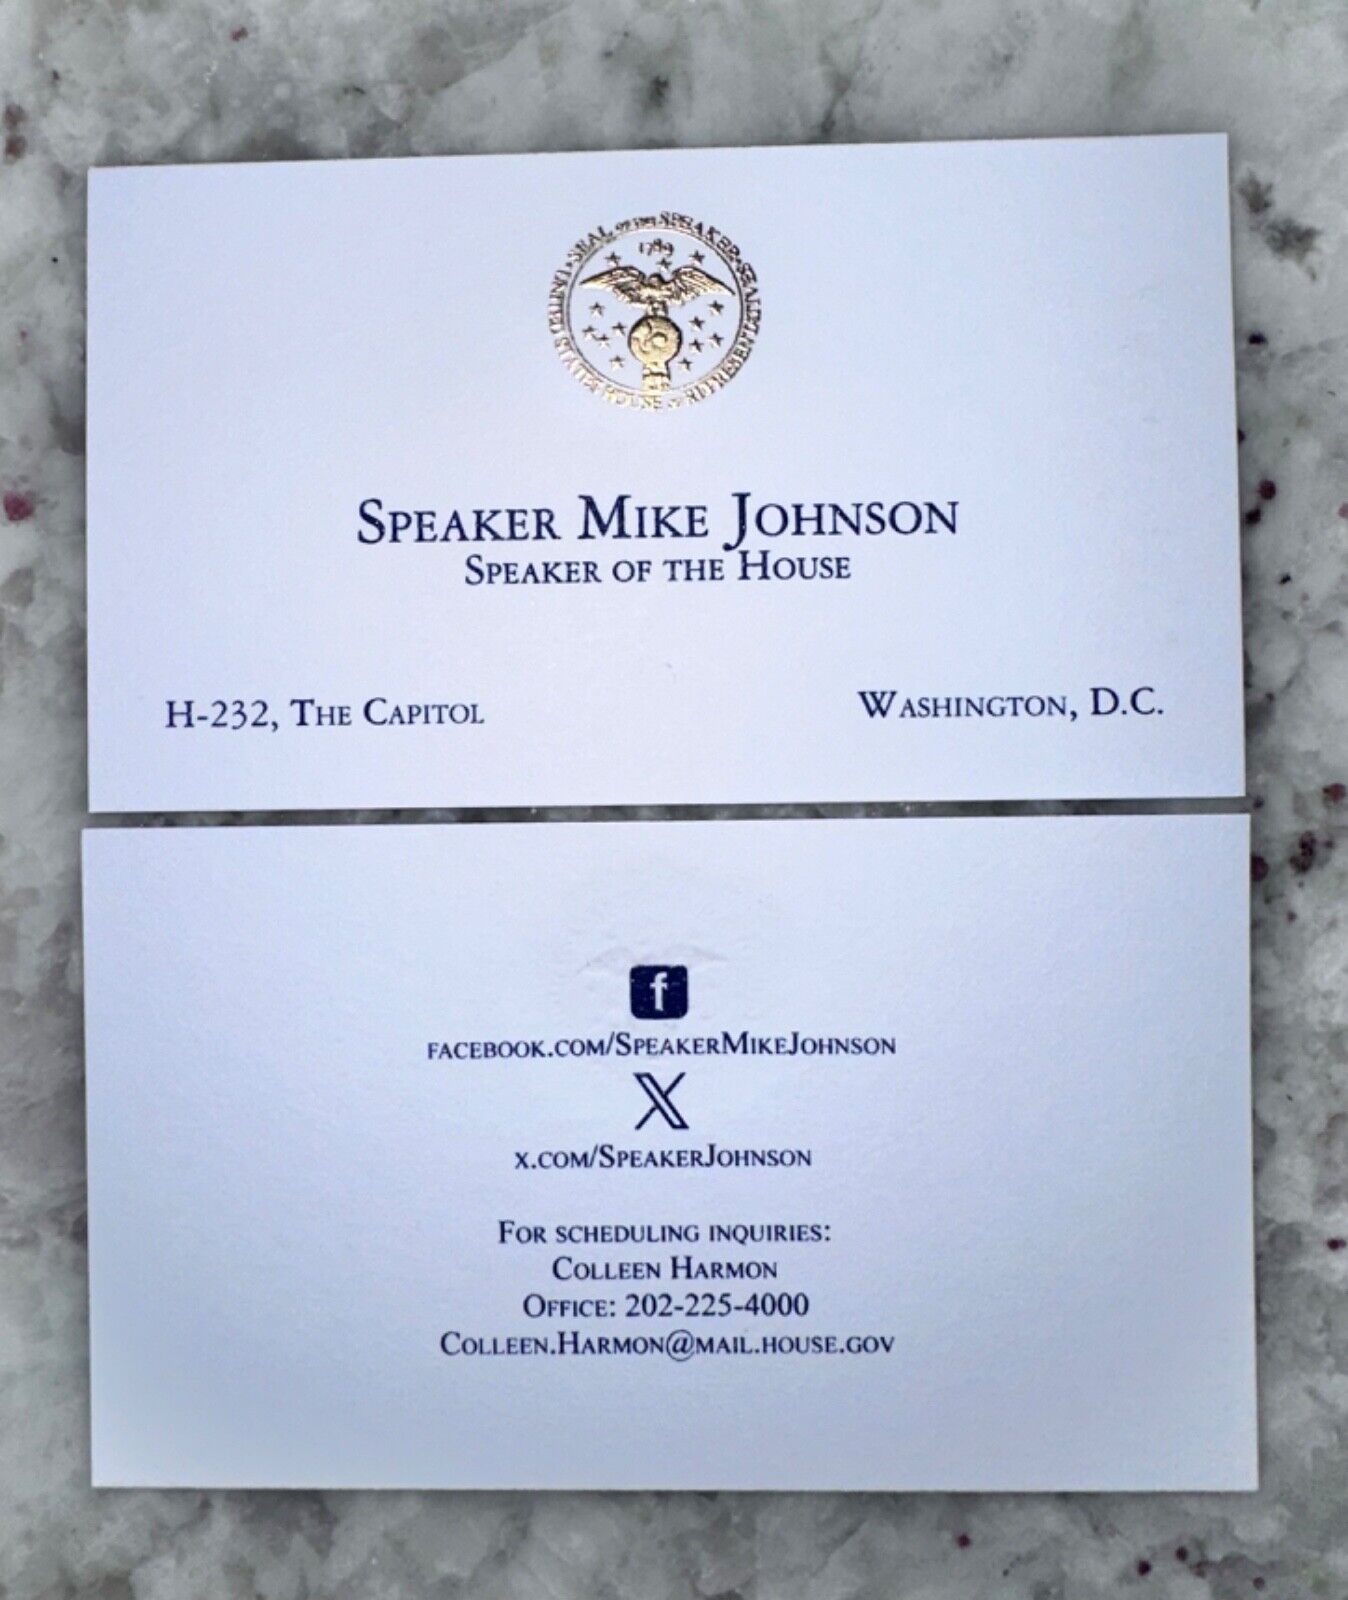 📢 SPEAKER MIKE JOHNSON OFFICIAL BUSINESS CARD SPEAKER OF THE HOUSE REPUBLICAN